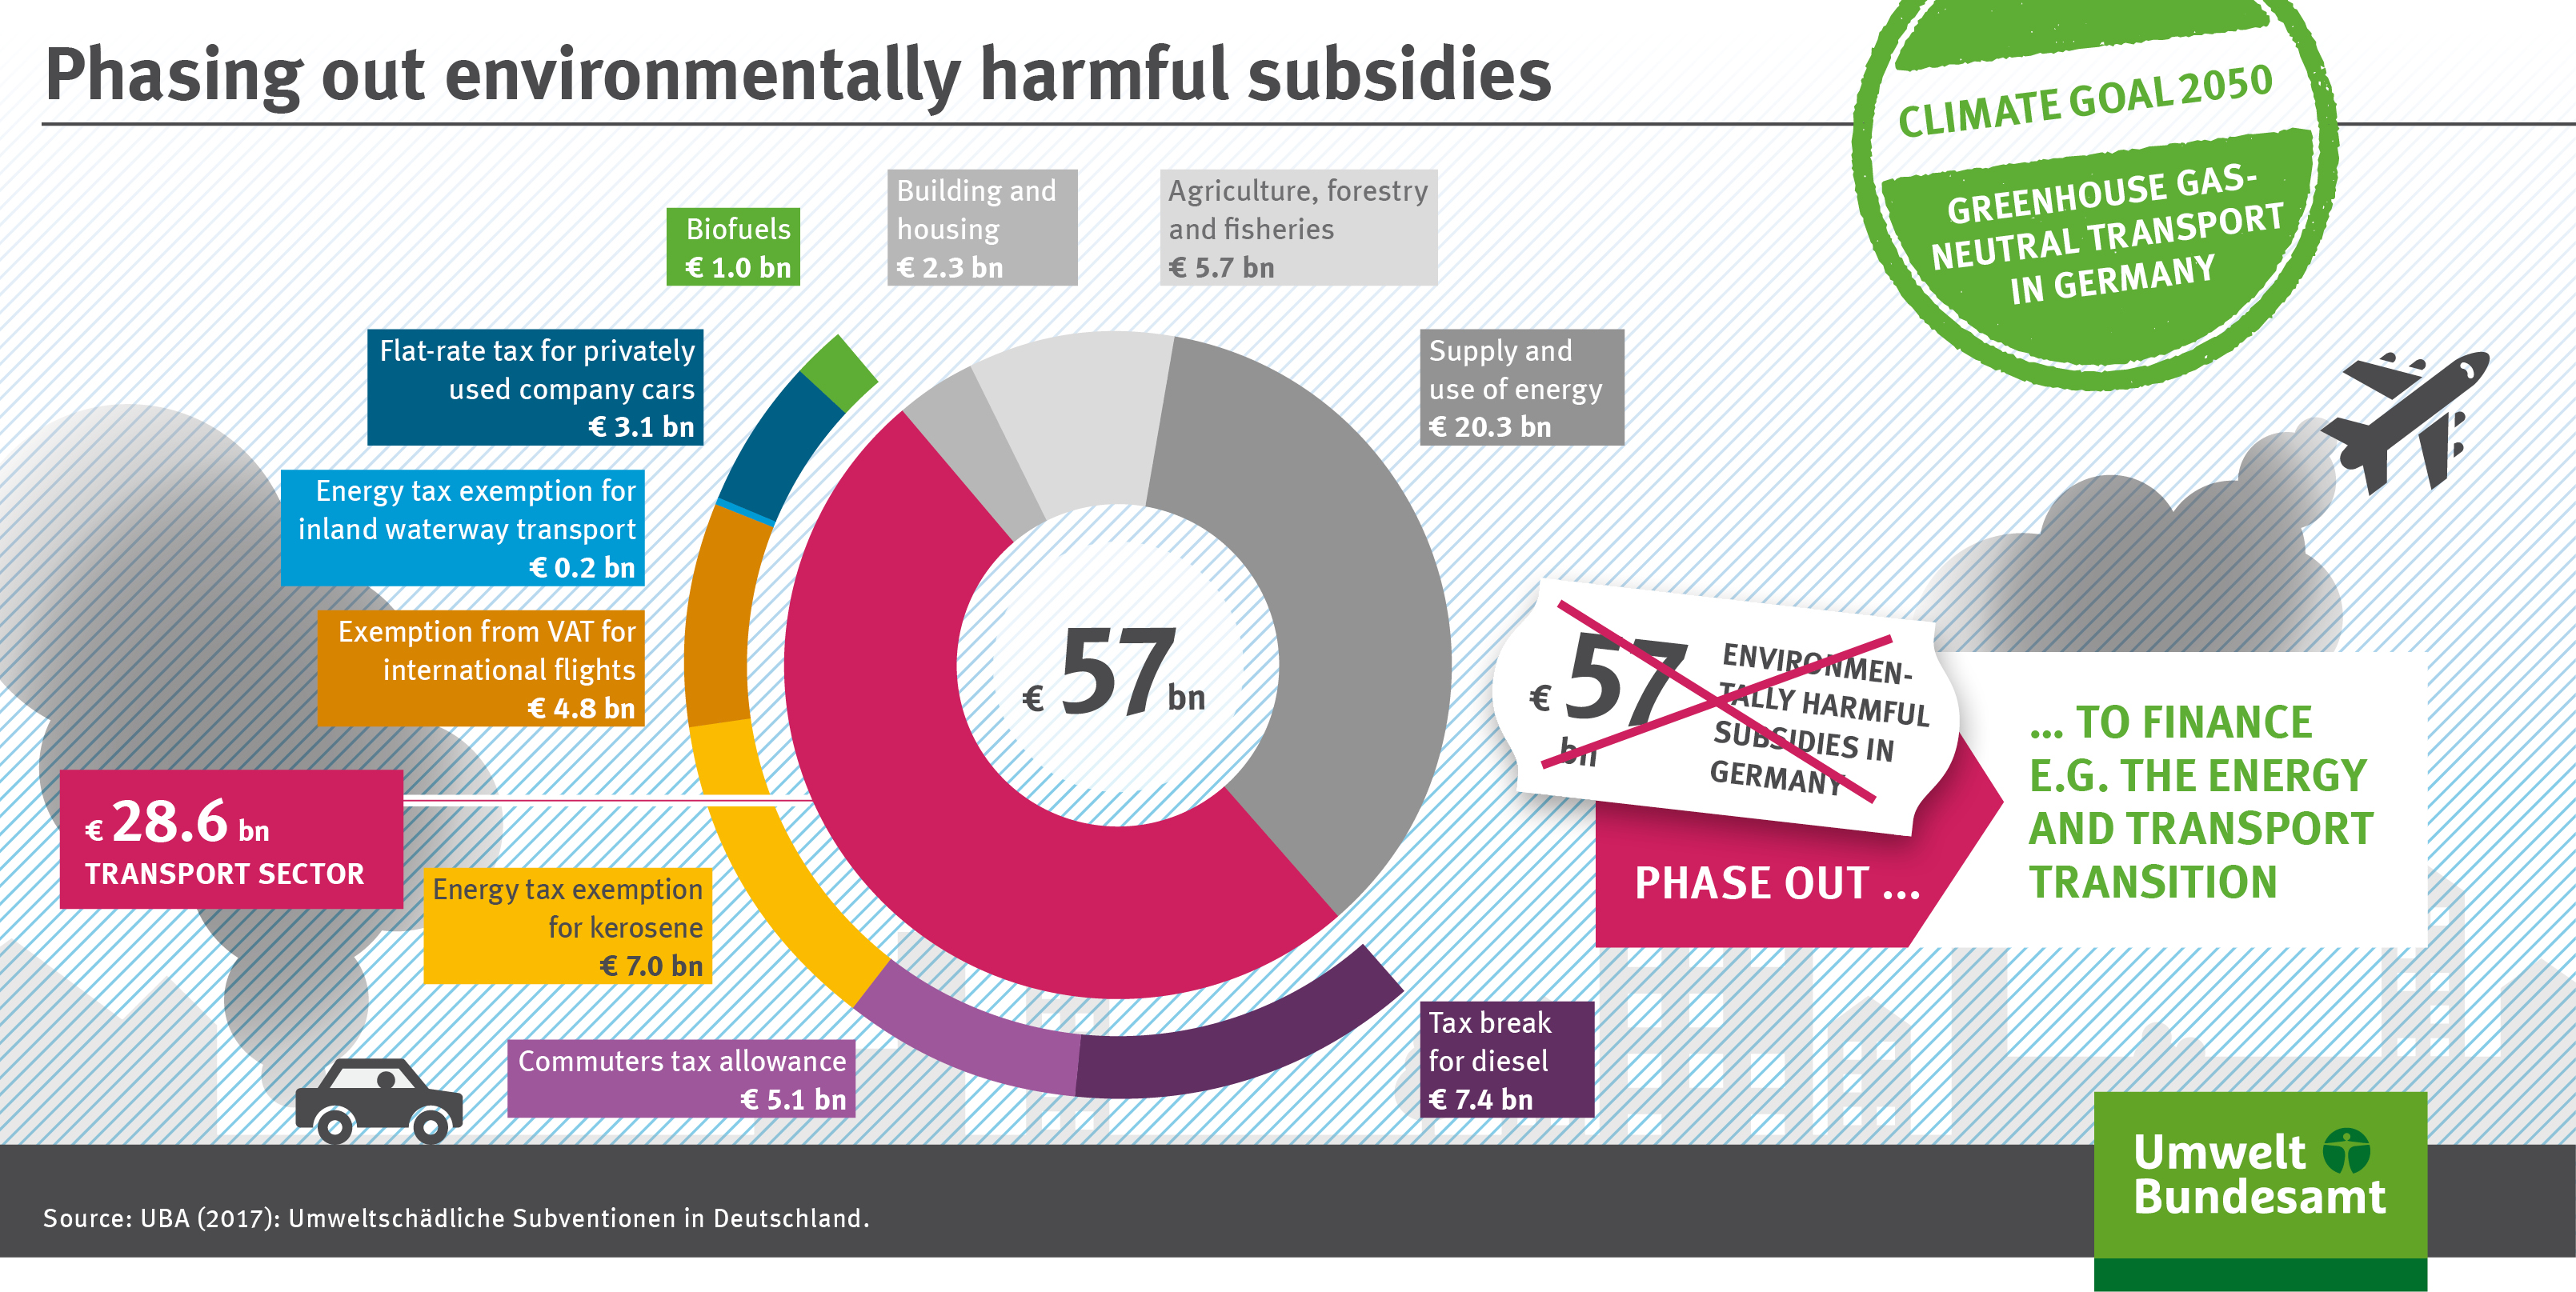 The infographic shows which subsidies should be phased out.